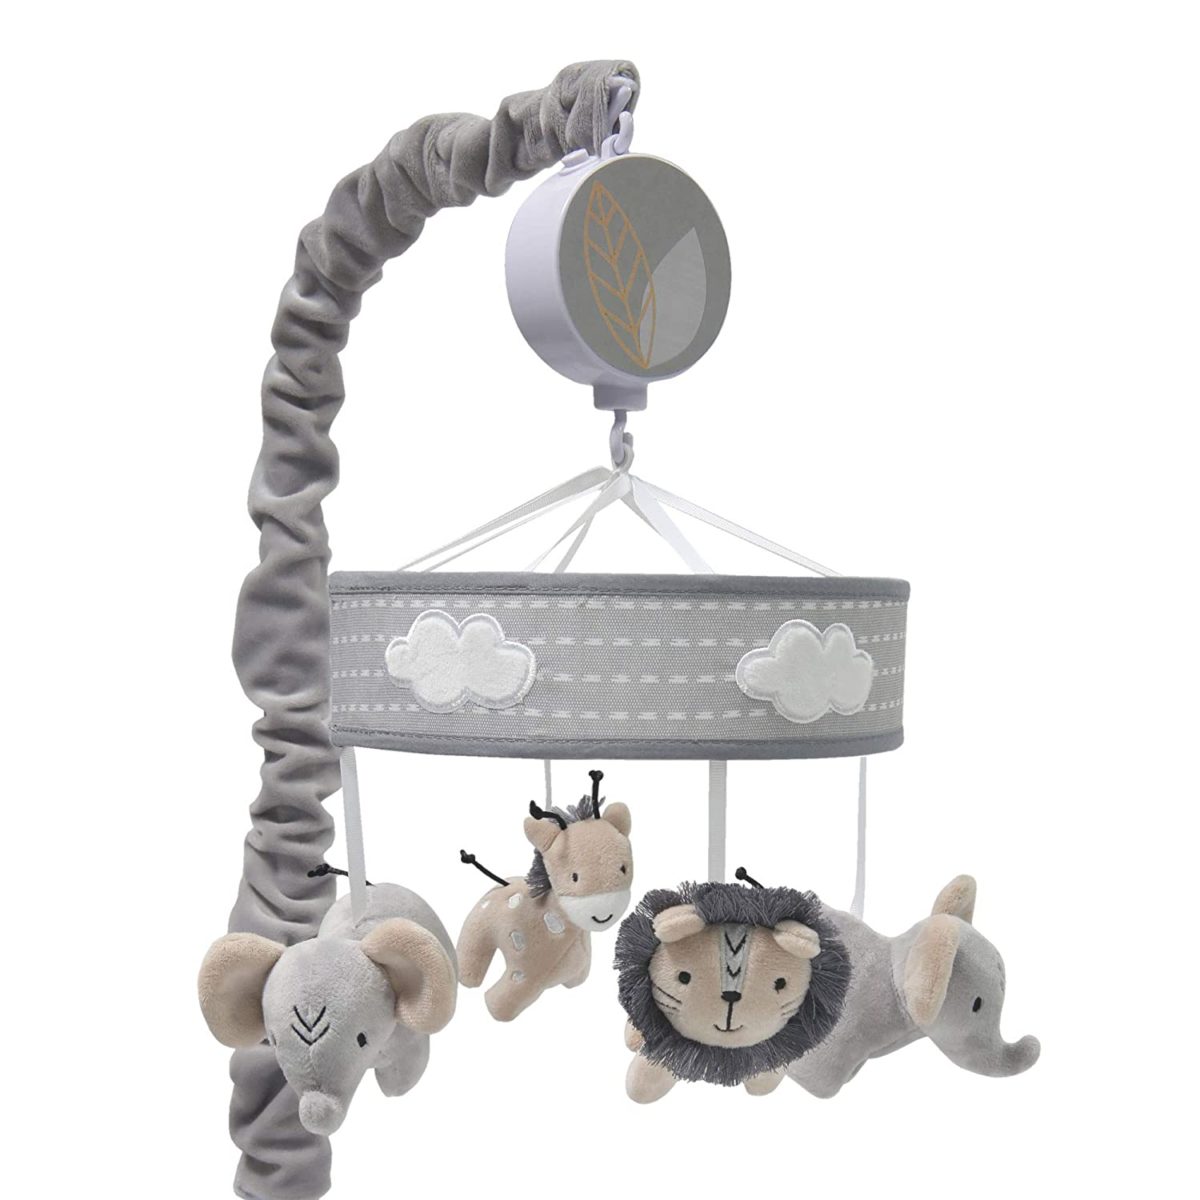 Baby Mobile for Cribs That Add a Touch of Whimsy